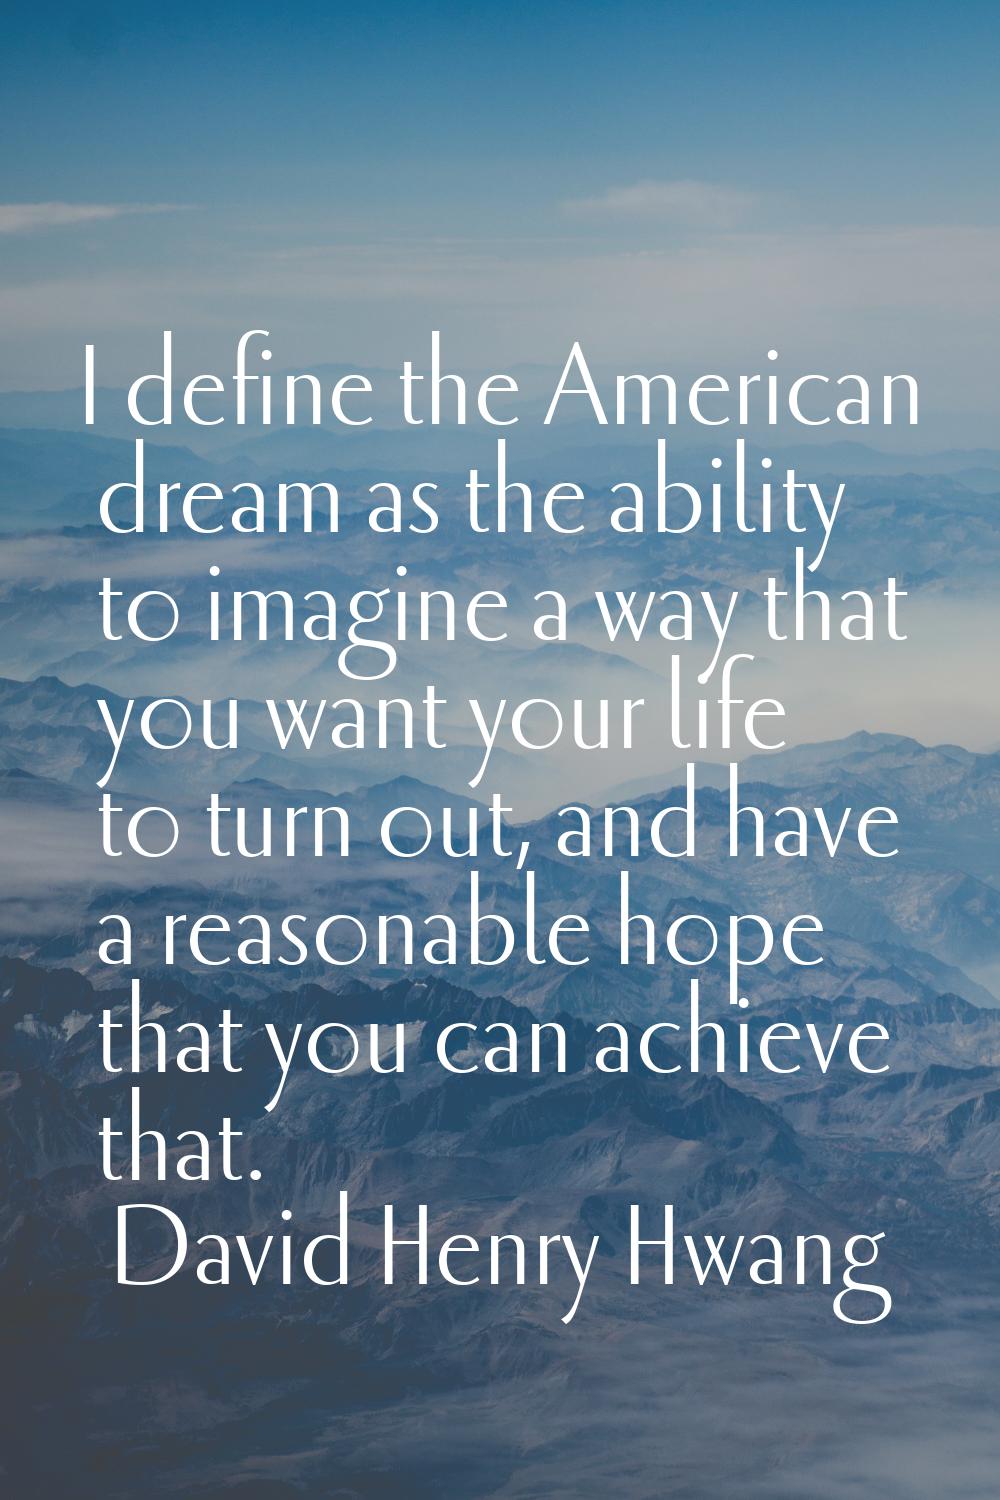 I define the American dream as the ability to imagine a way that you want your life to turn out, an